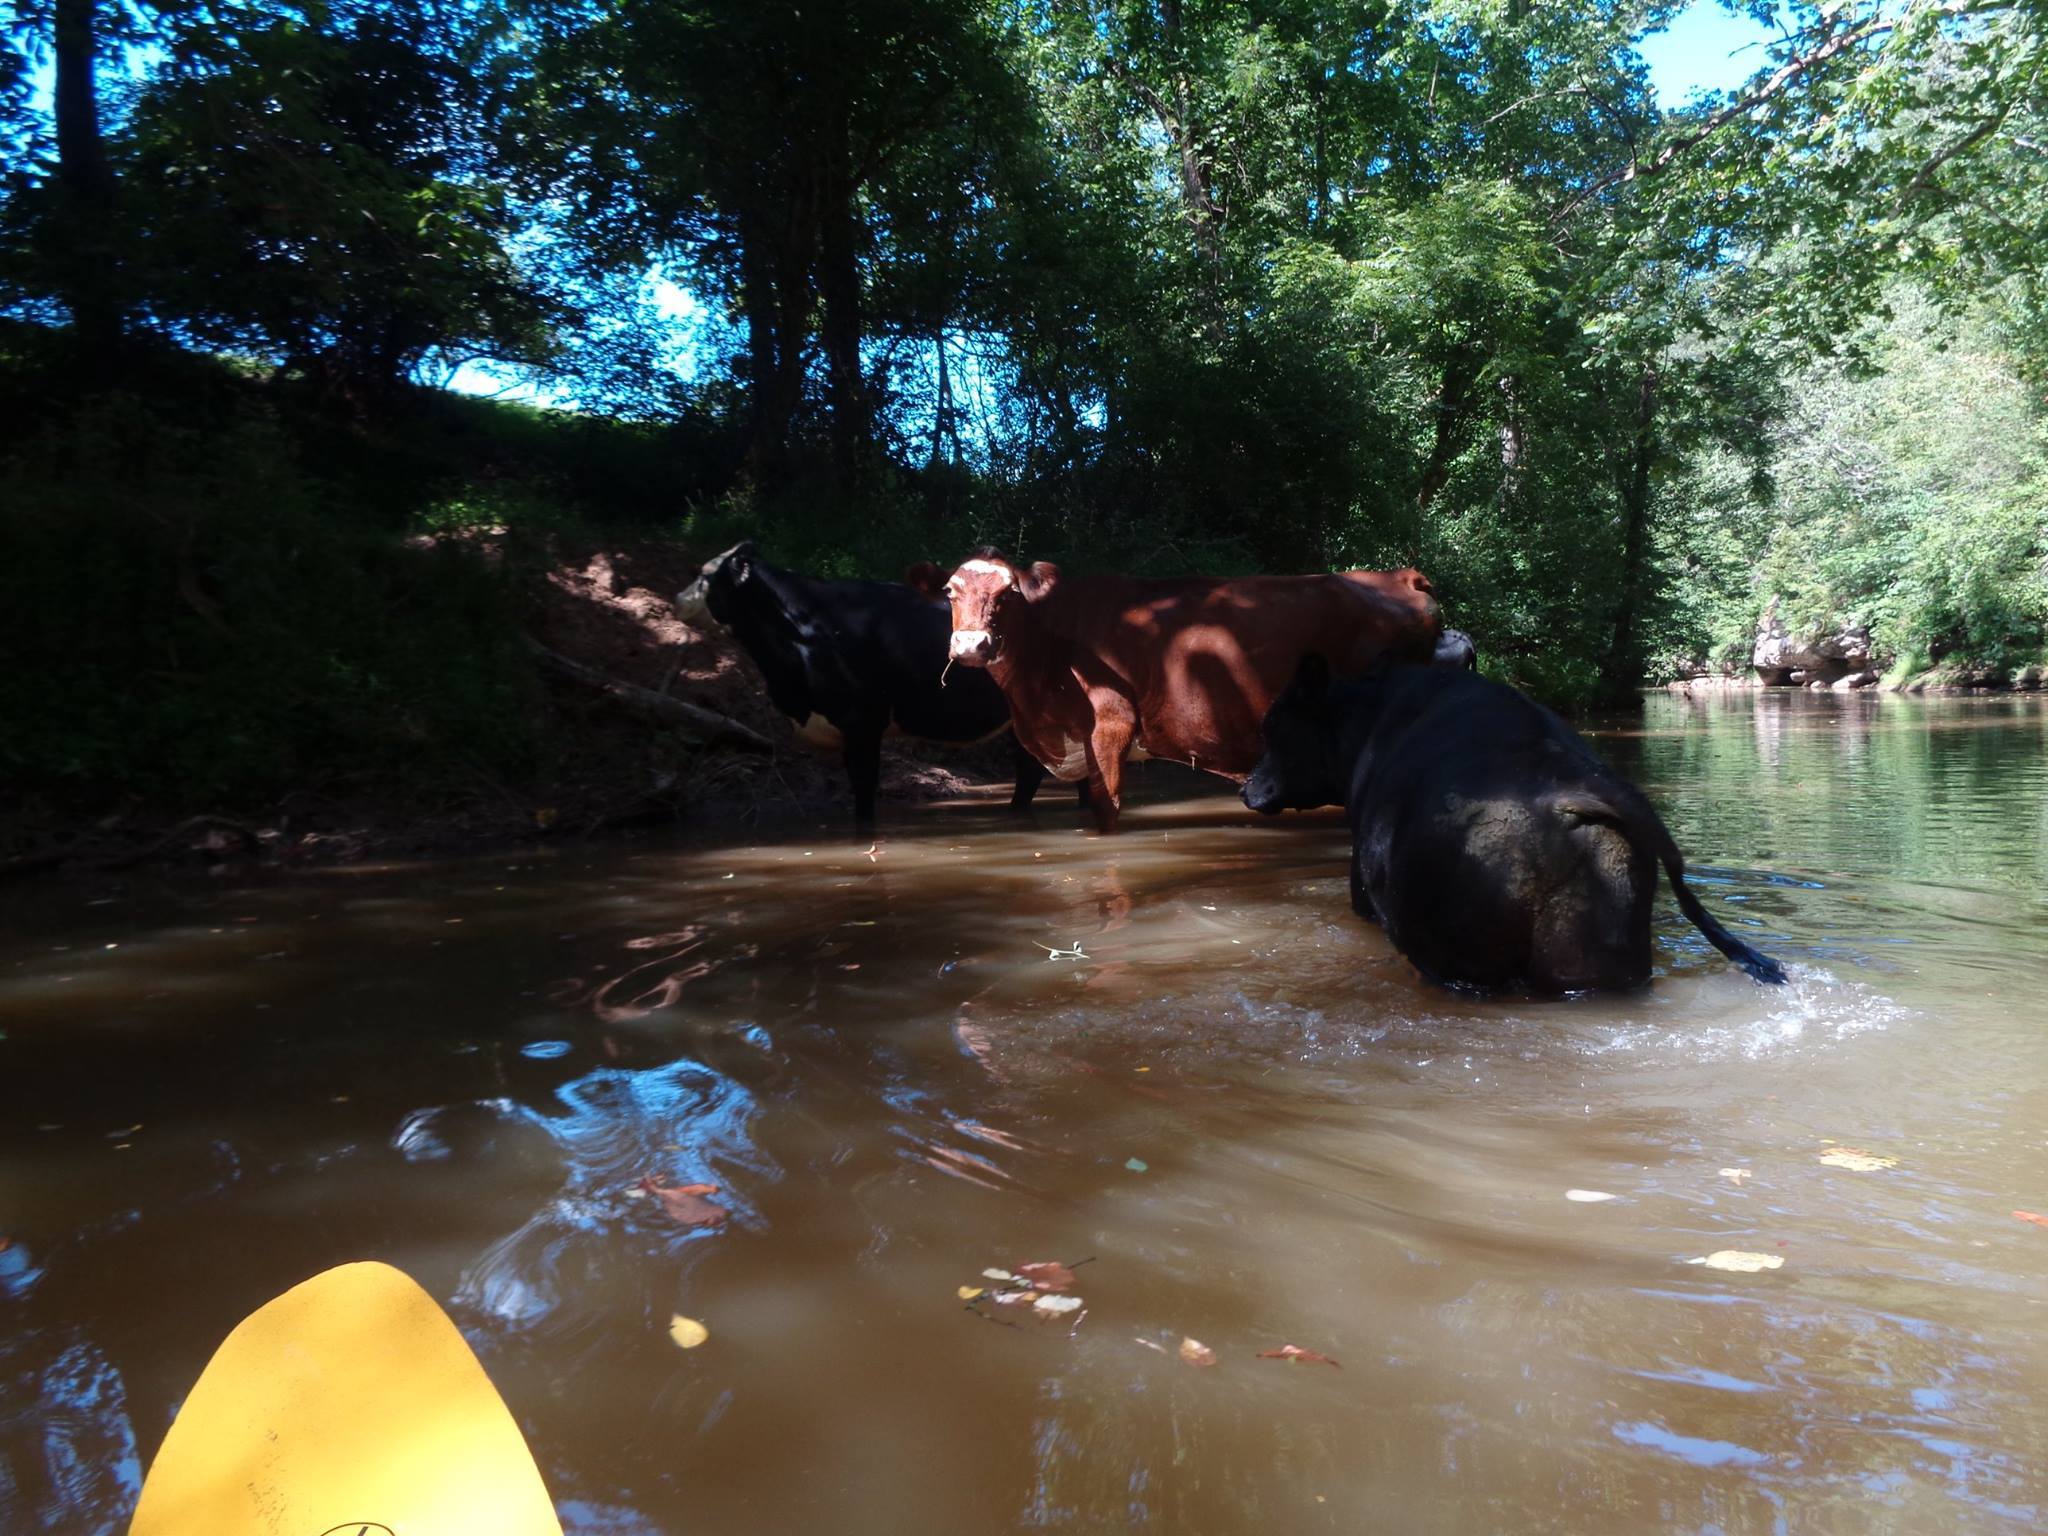 kayaking on a river with cattle in the river